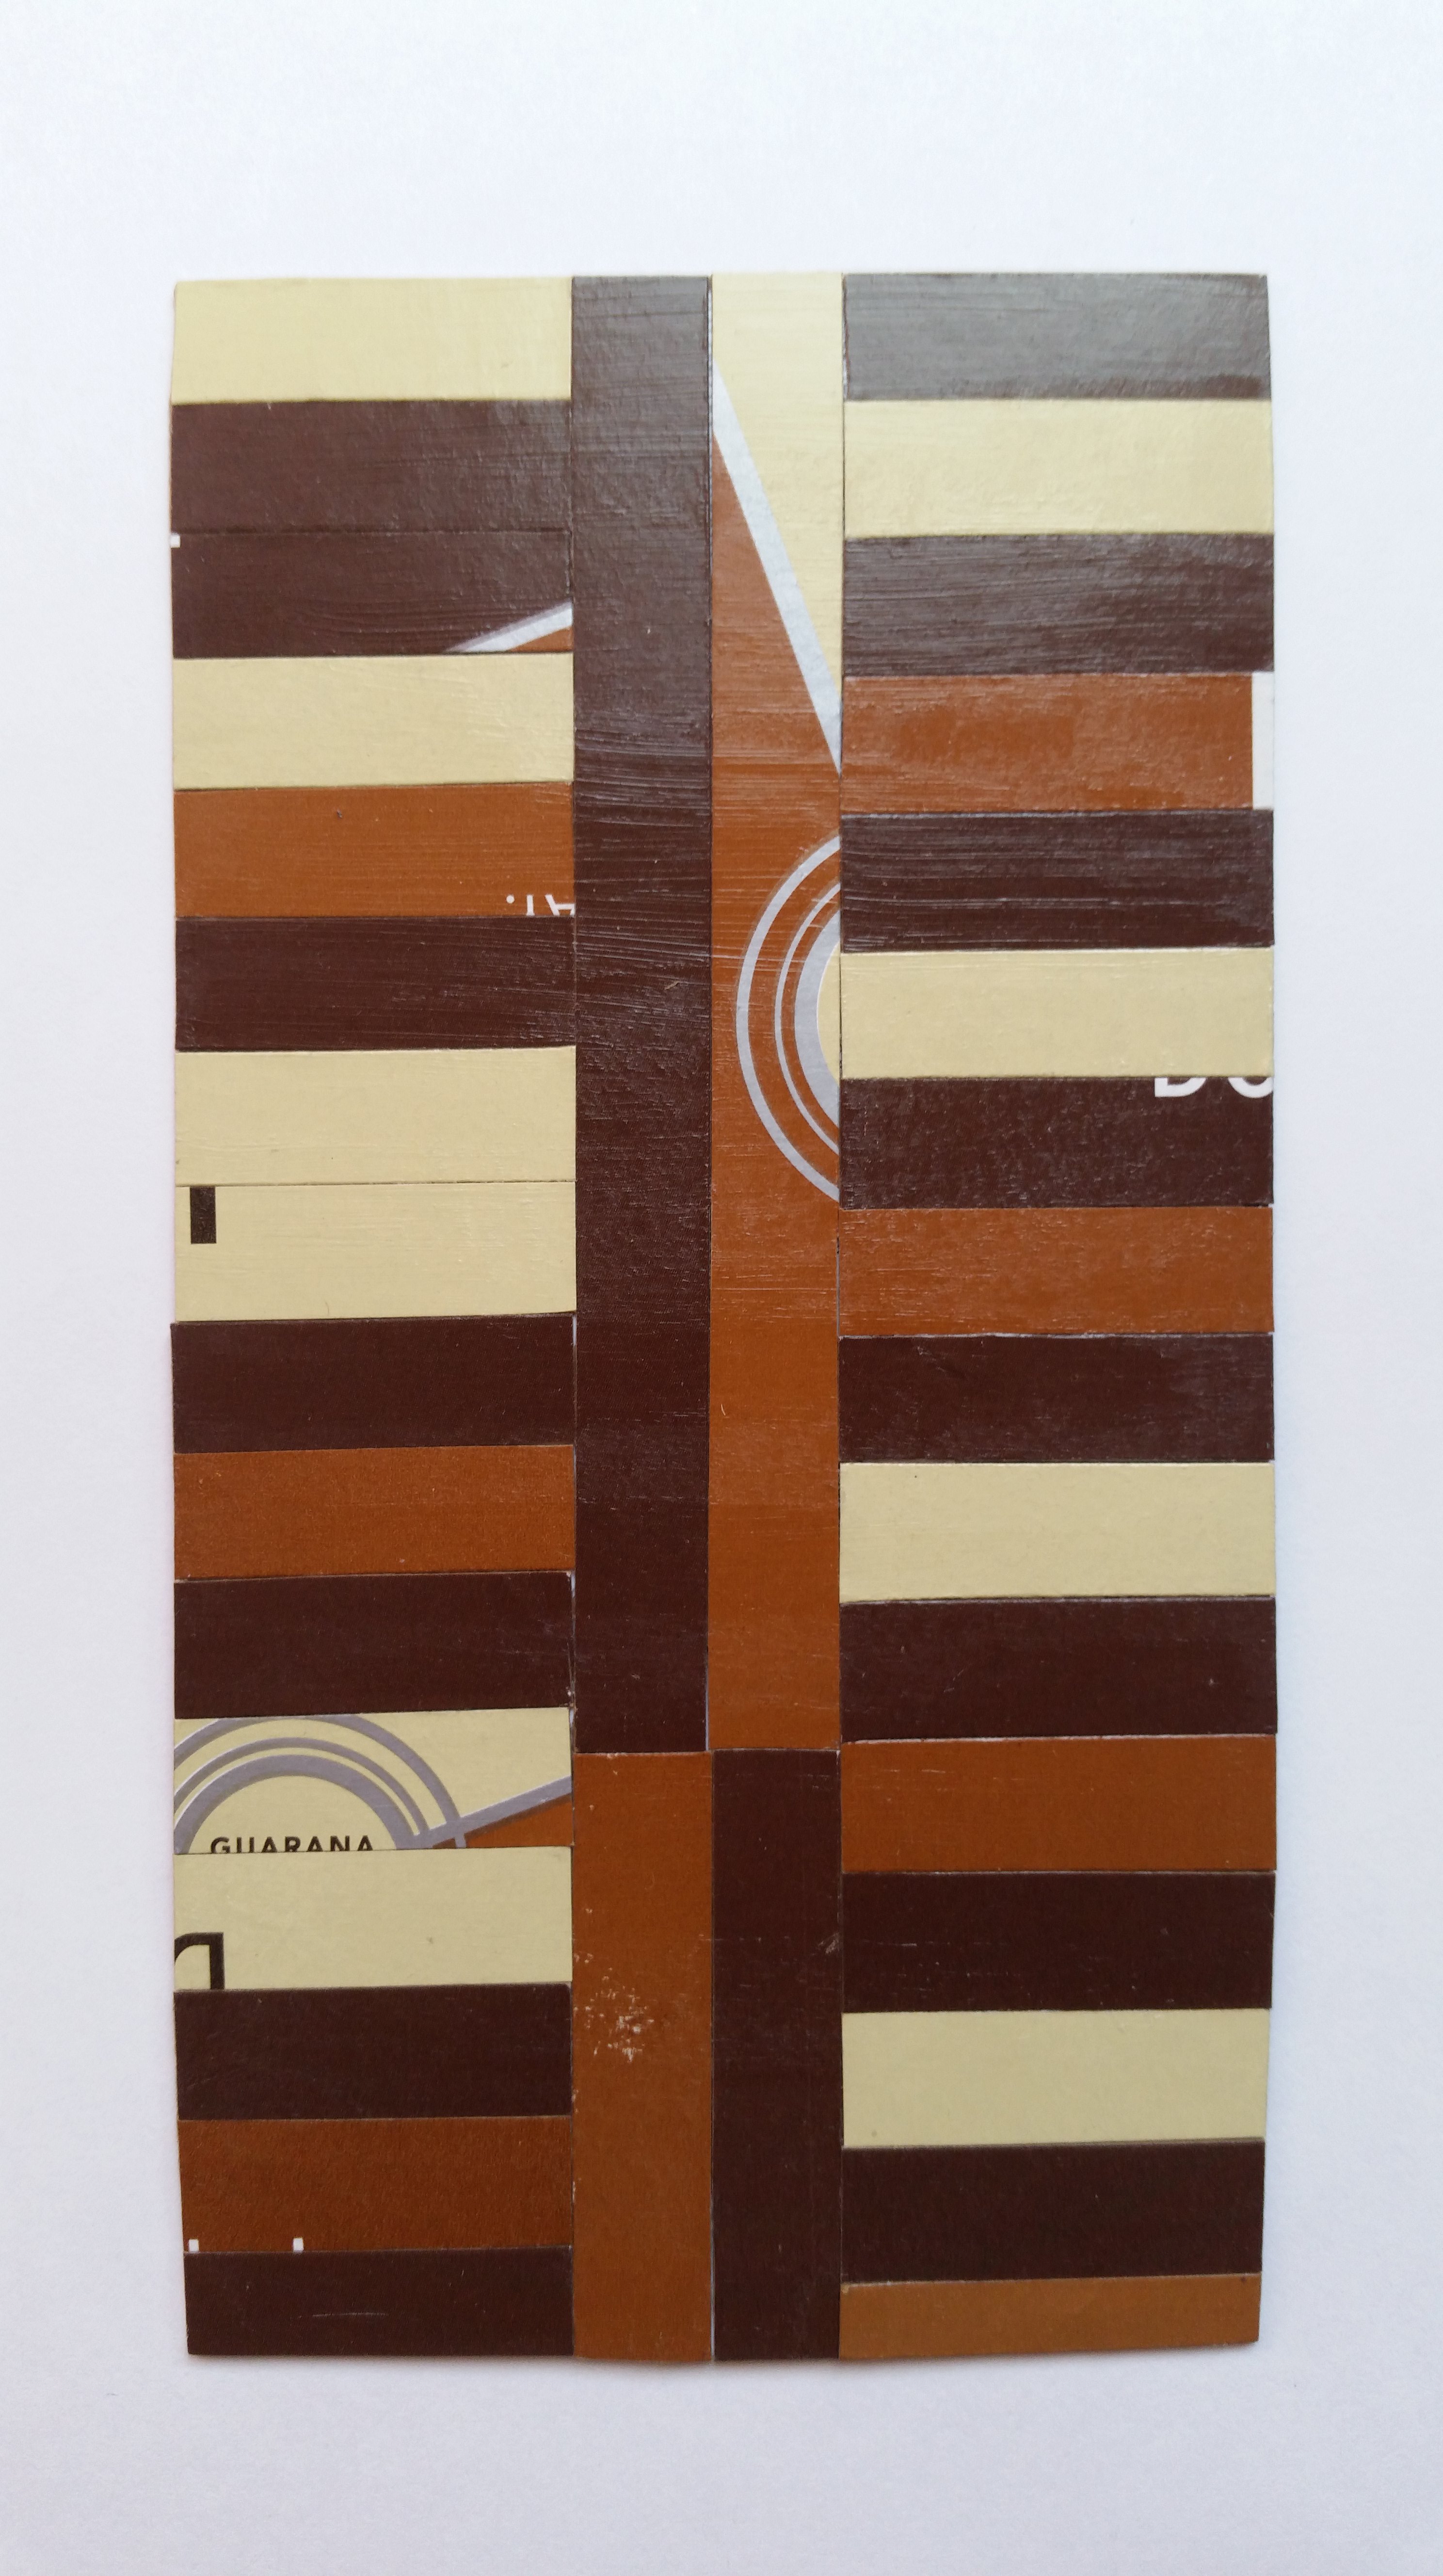 Card has Coffee pattern. Card has strips of the box glued vertically in the middle with shorter strips glued horizontally on either side of the vertical strips. Brown, dark brown, beige, and some silver and white detail.